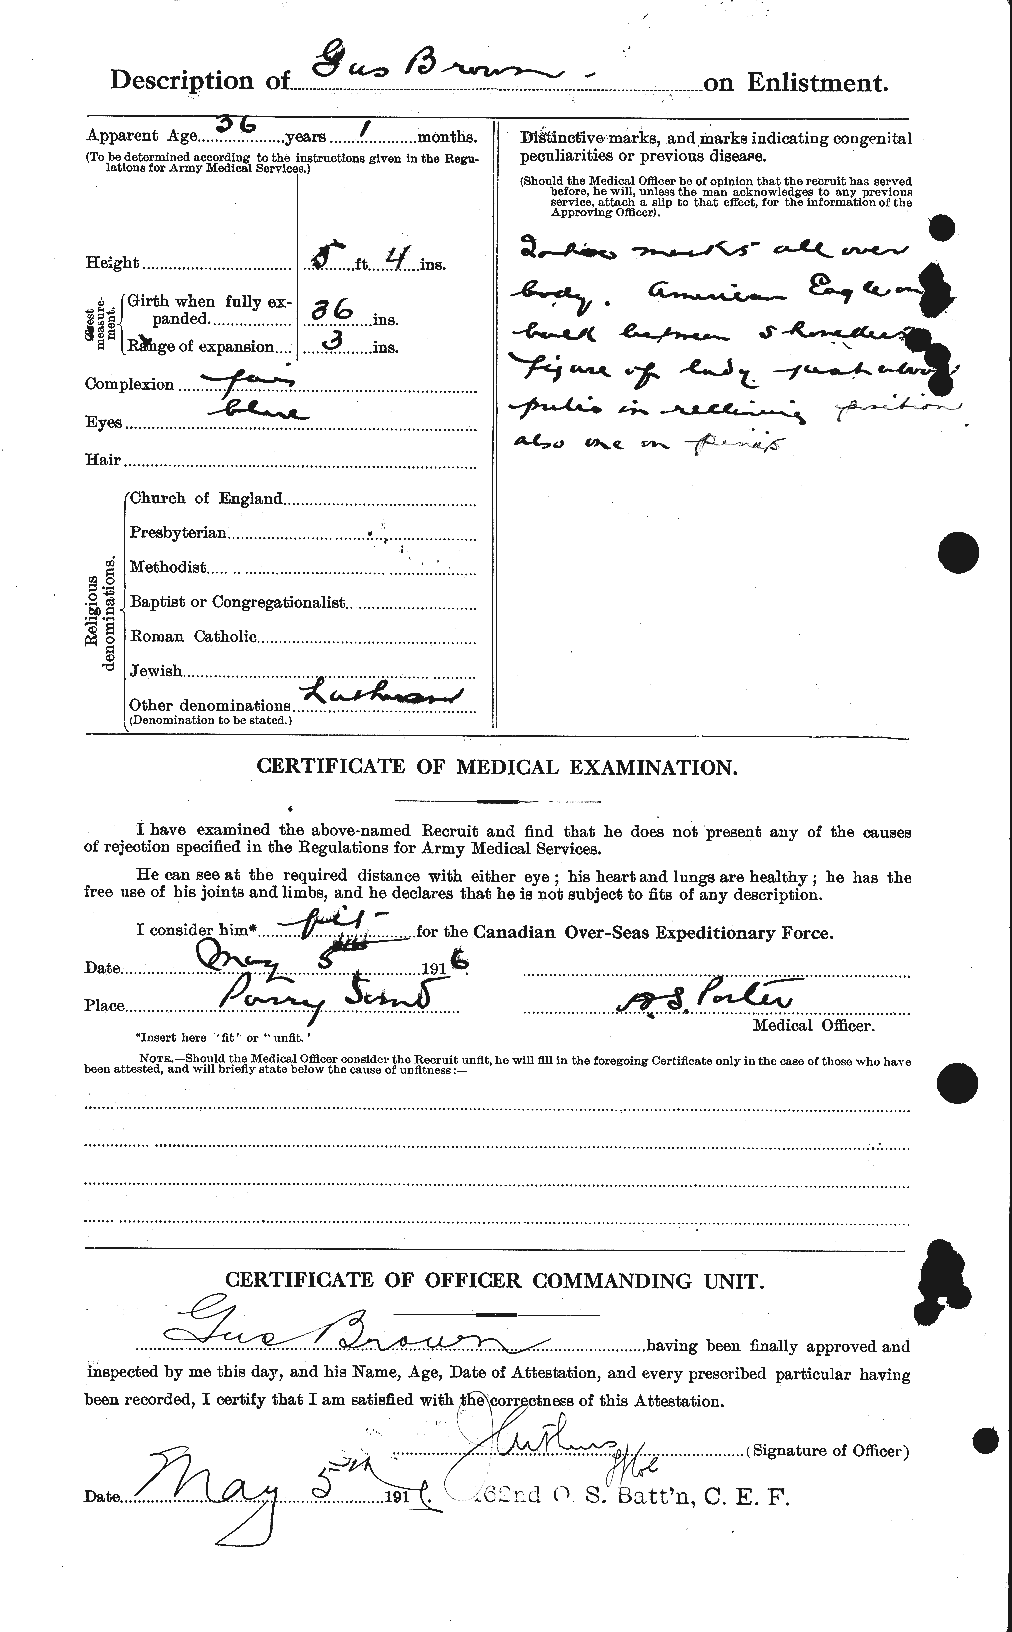 Personnel Records of the First World War - CEF 262651b